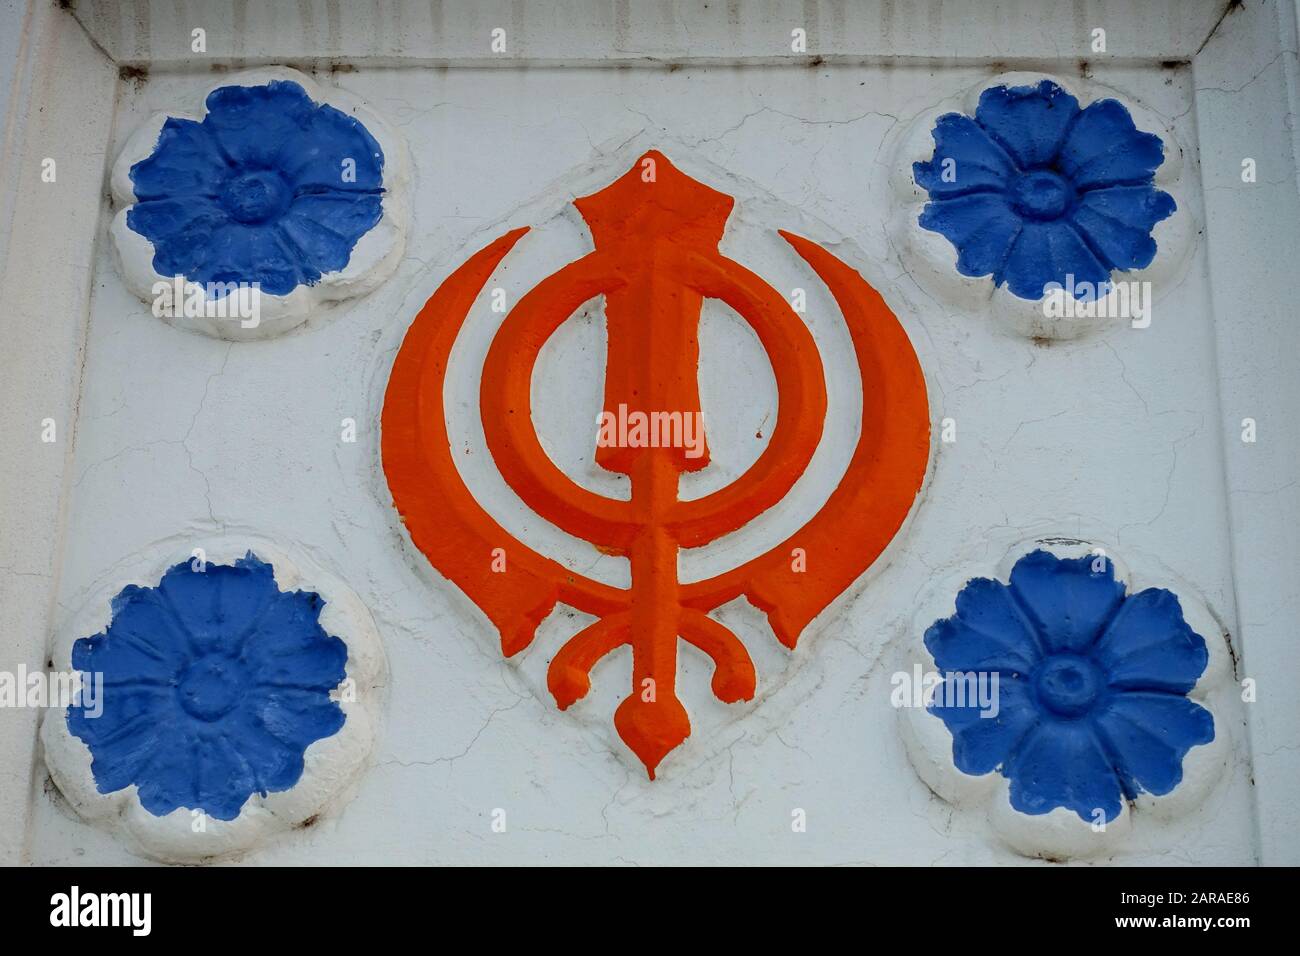 The Khanda a symbol of the Sikh faith - Sikhism or Sikhi is a Indian monotheistic religion that originated in the Punjab region Stock Photo